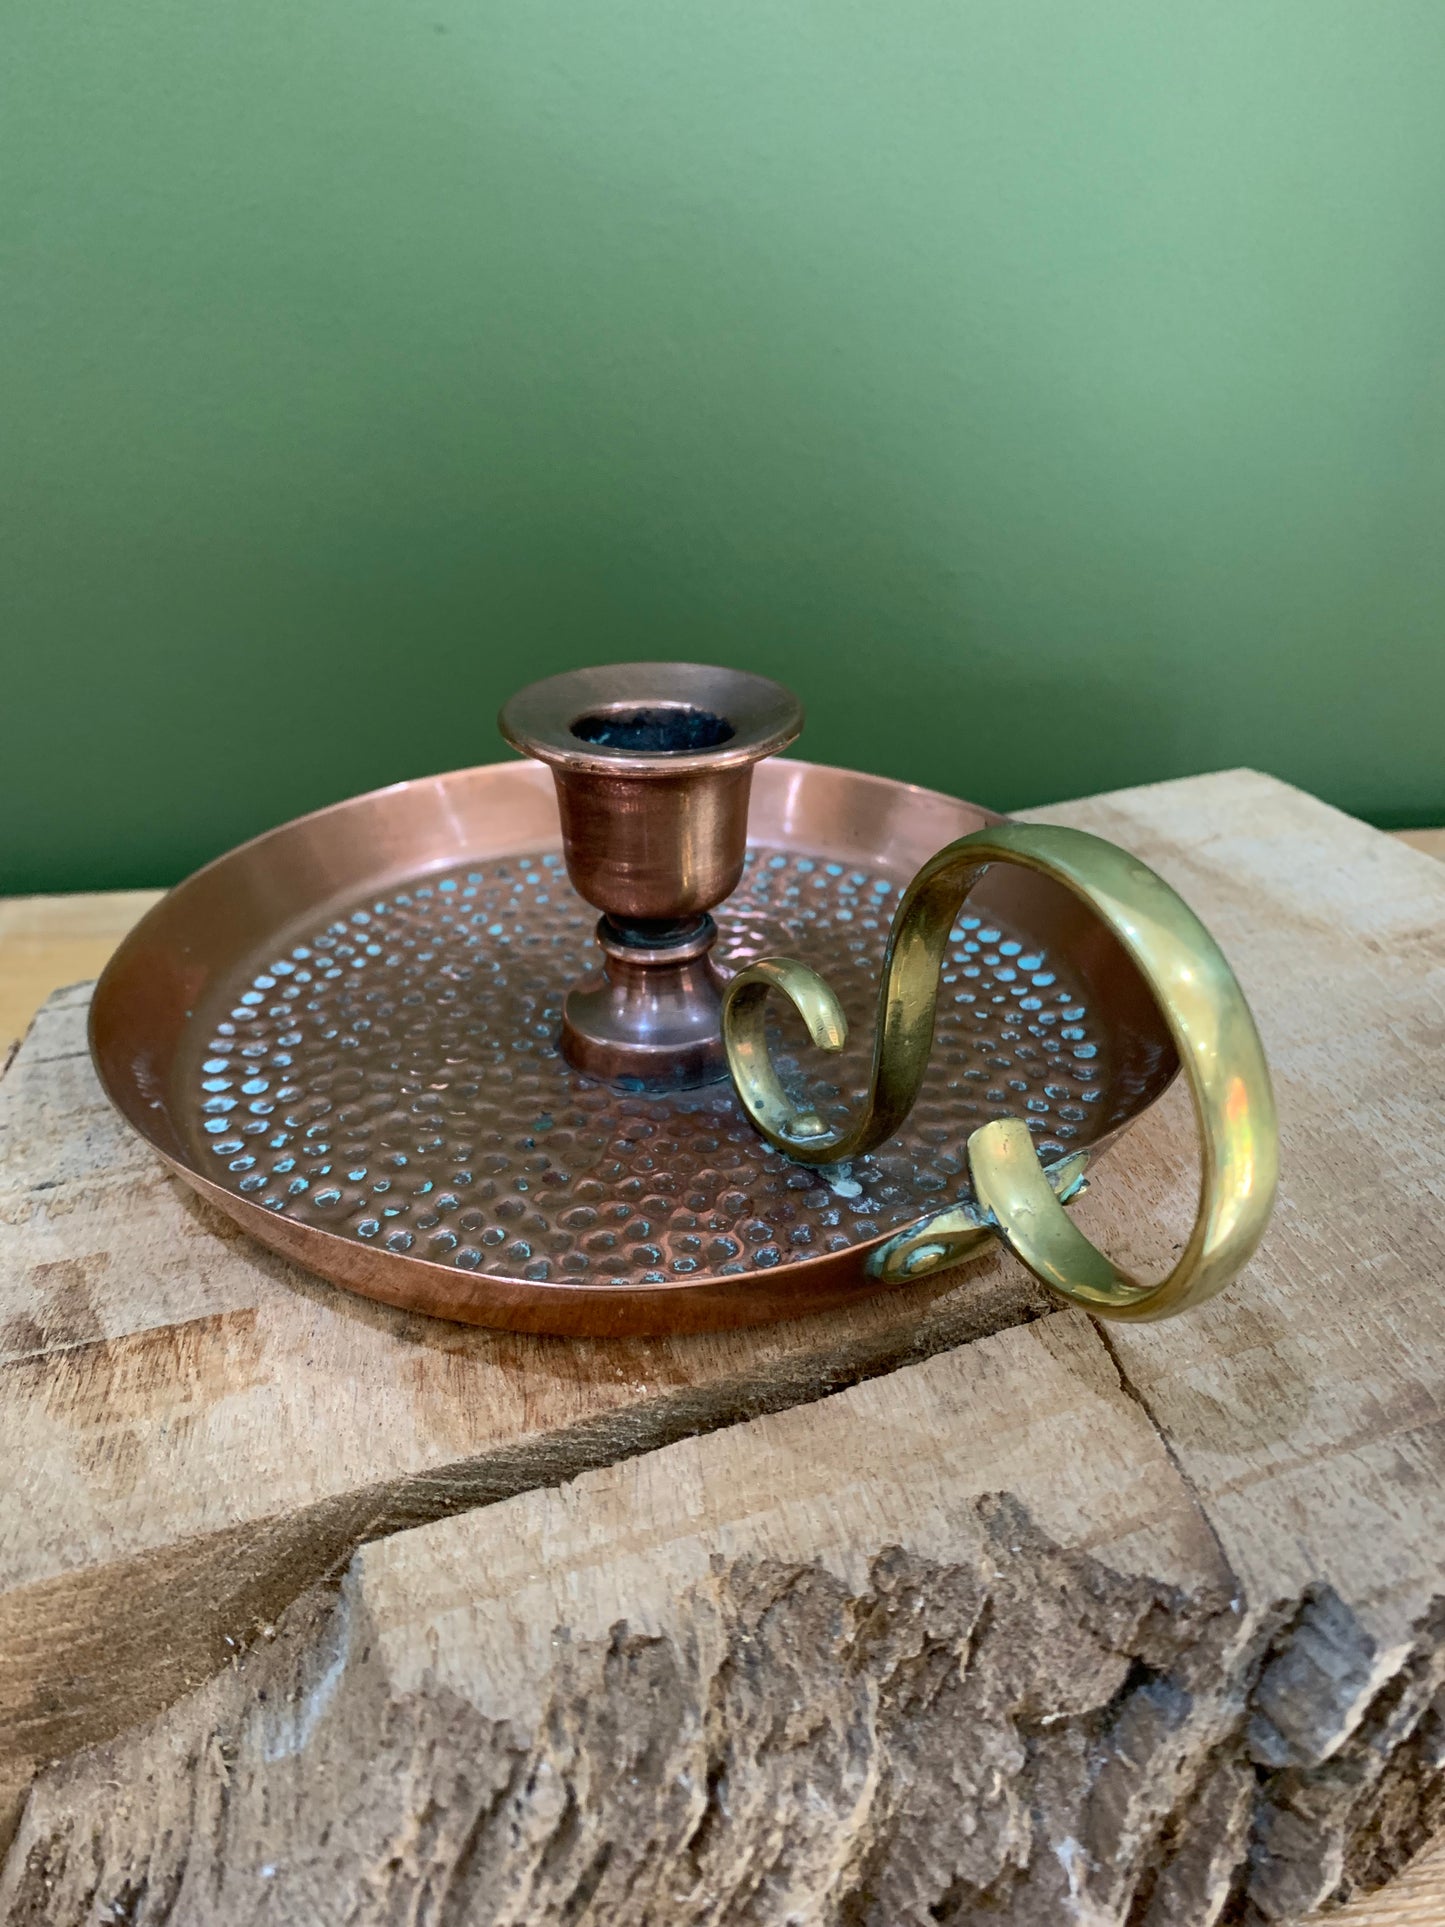 Antique Copper and Brass Candle Holder - Vintage Elegance and Timeless Beauty